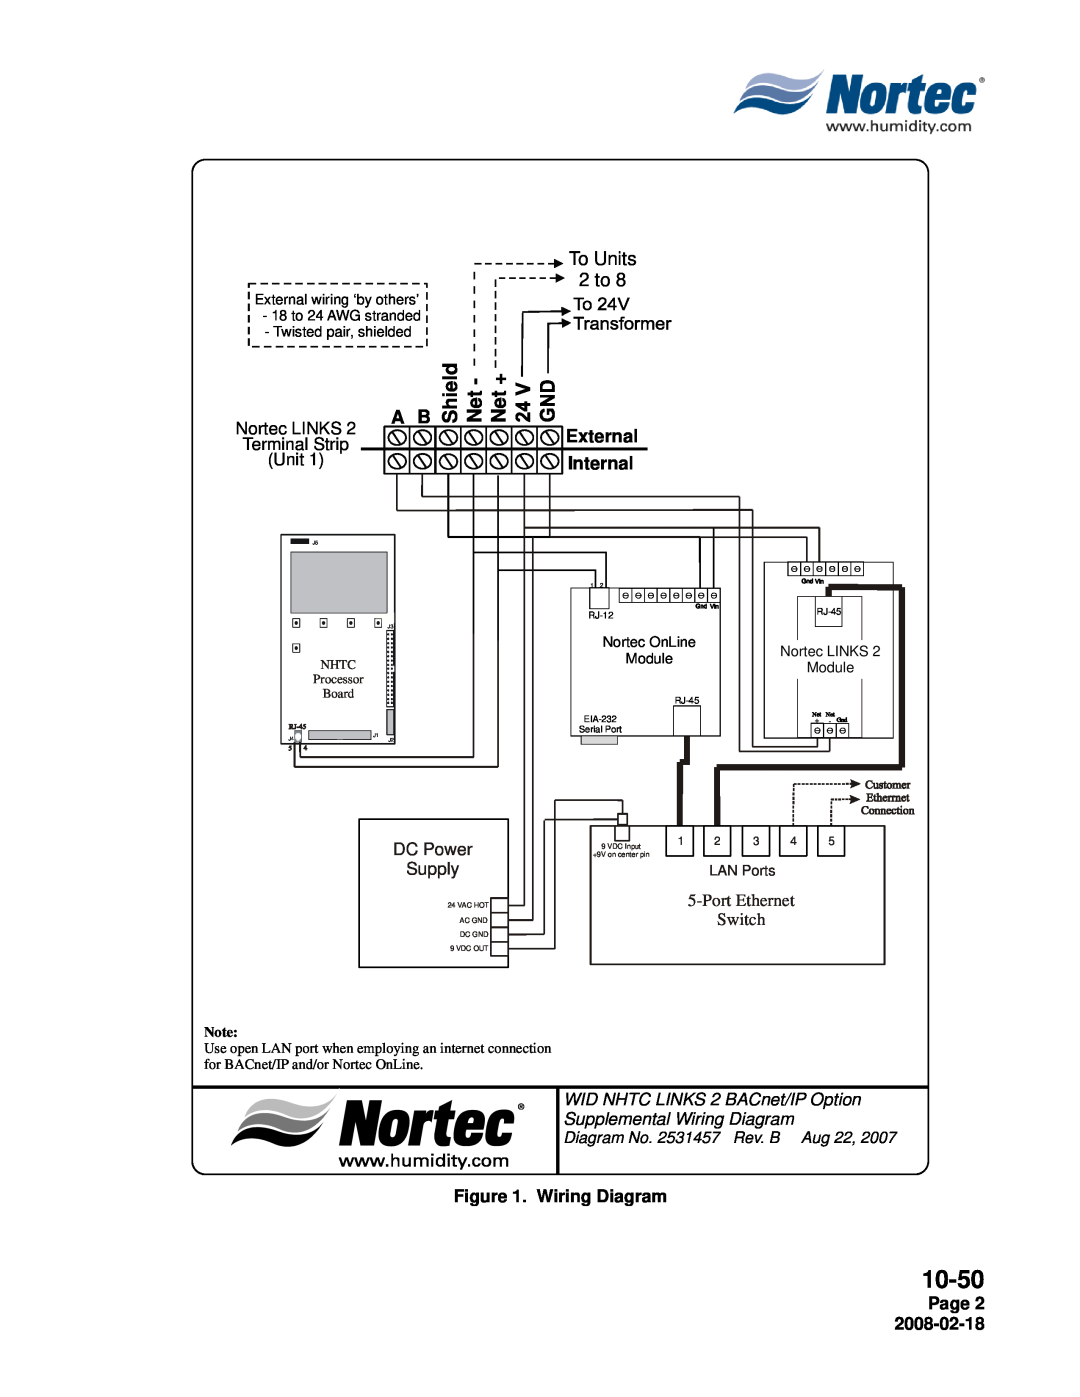 Nortec Industries NHTC Series Net + Net, 10-50, To Units 2 to, External Internal, DC Power, Supply, PortEthernet, Switch 